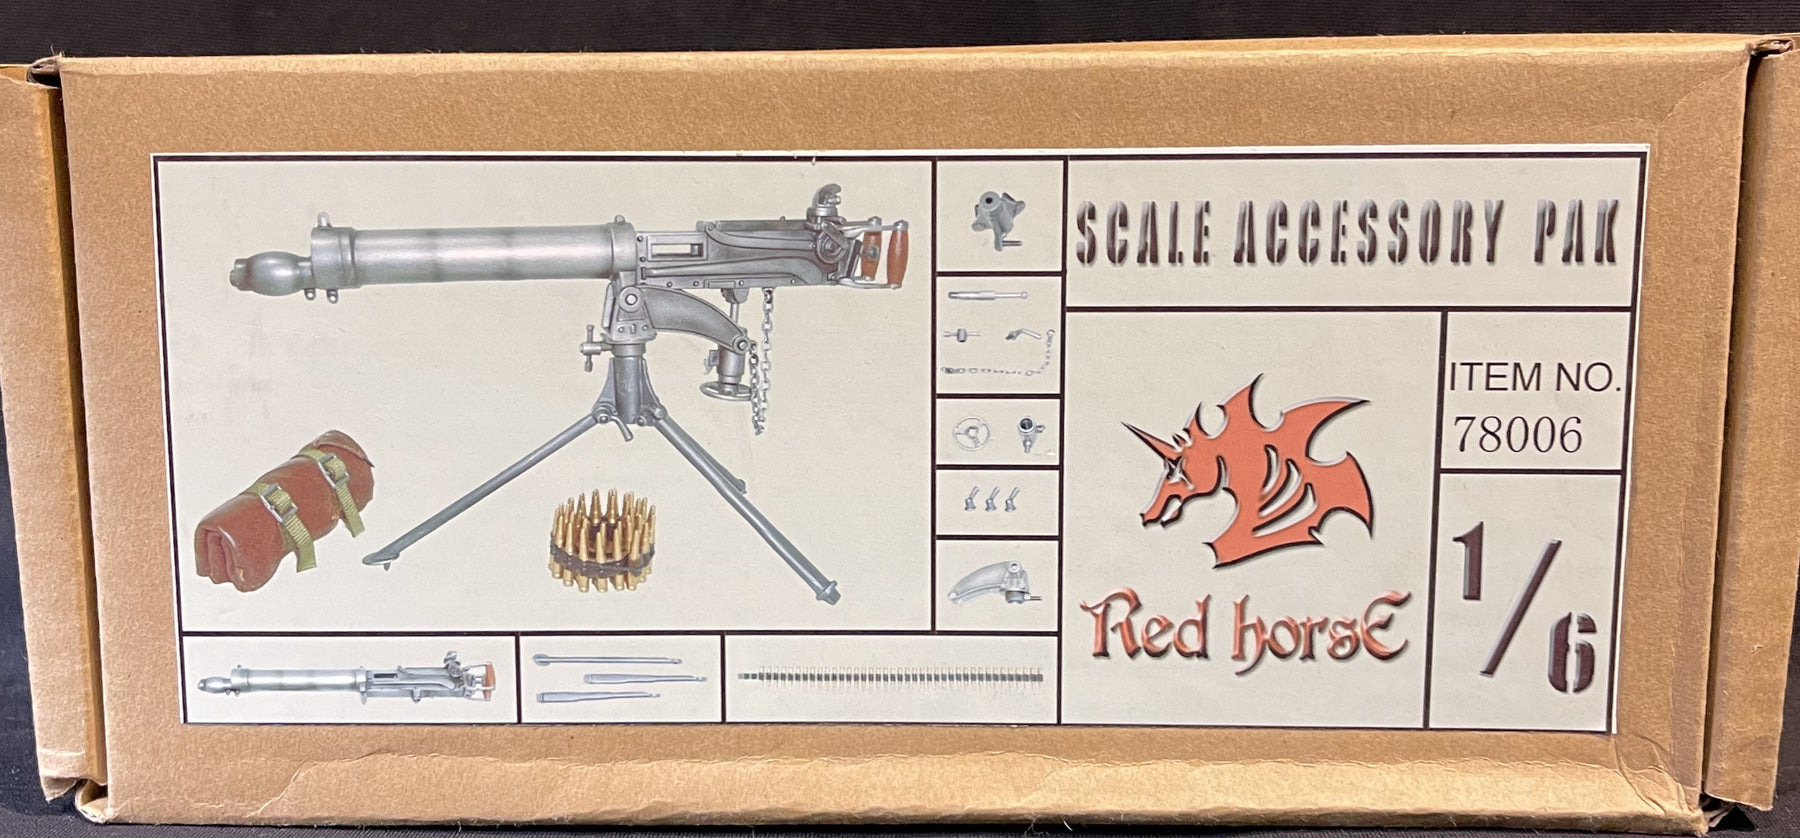 Red Horse - 1/6 Scale Military Accessory Pack - WWII Vickers Mark 1 Machine Gun (Plastic) RHS-78006